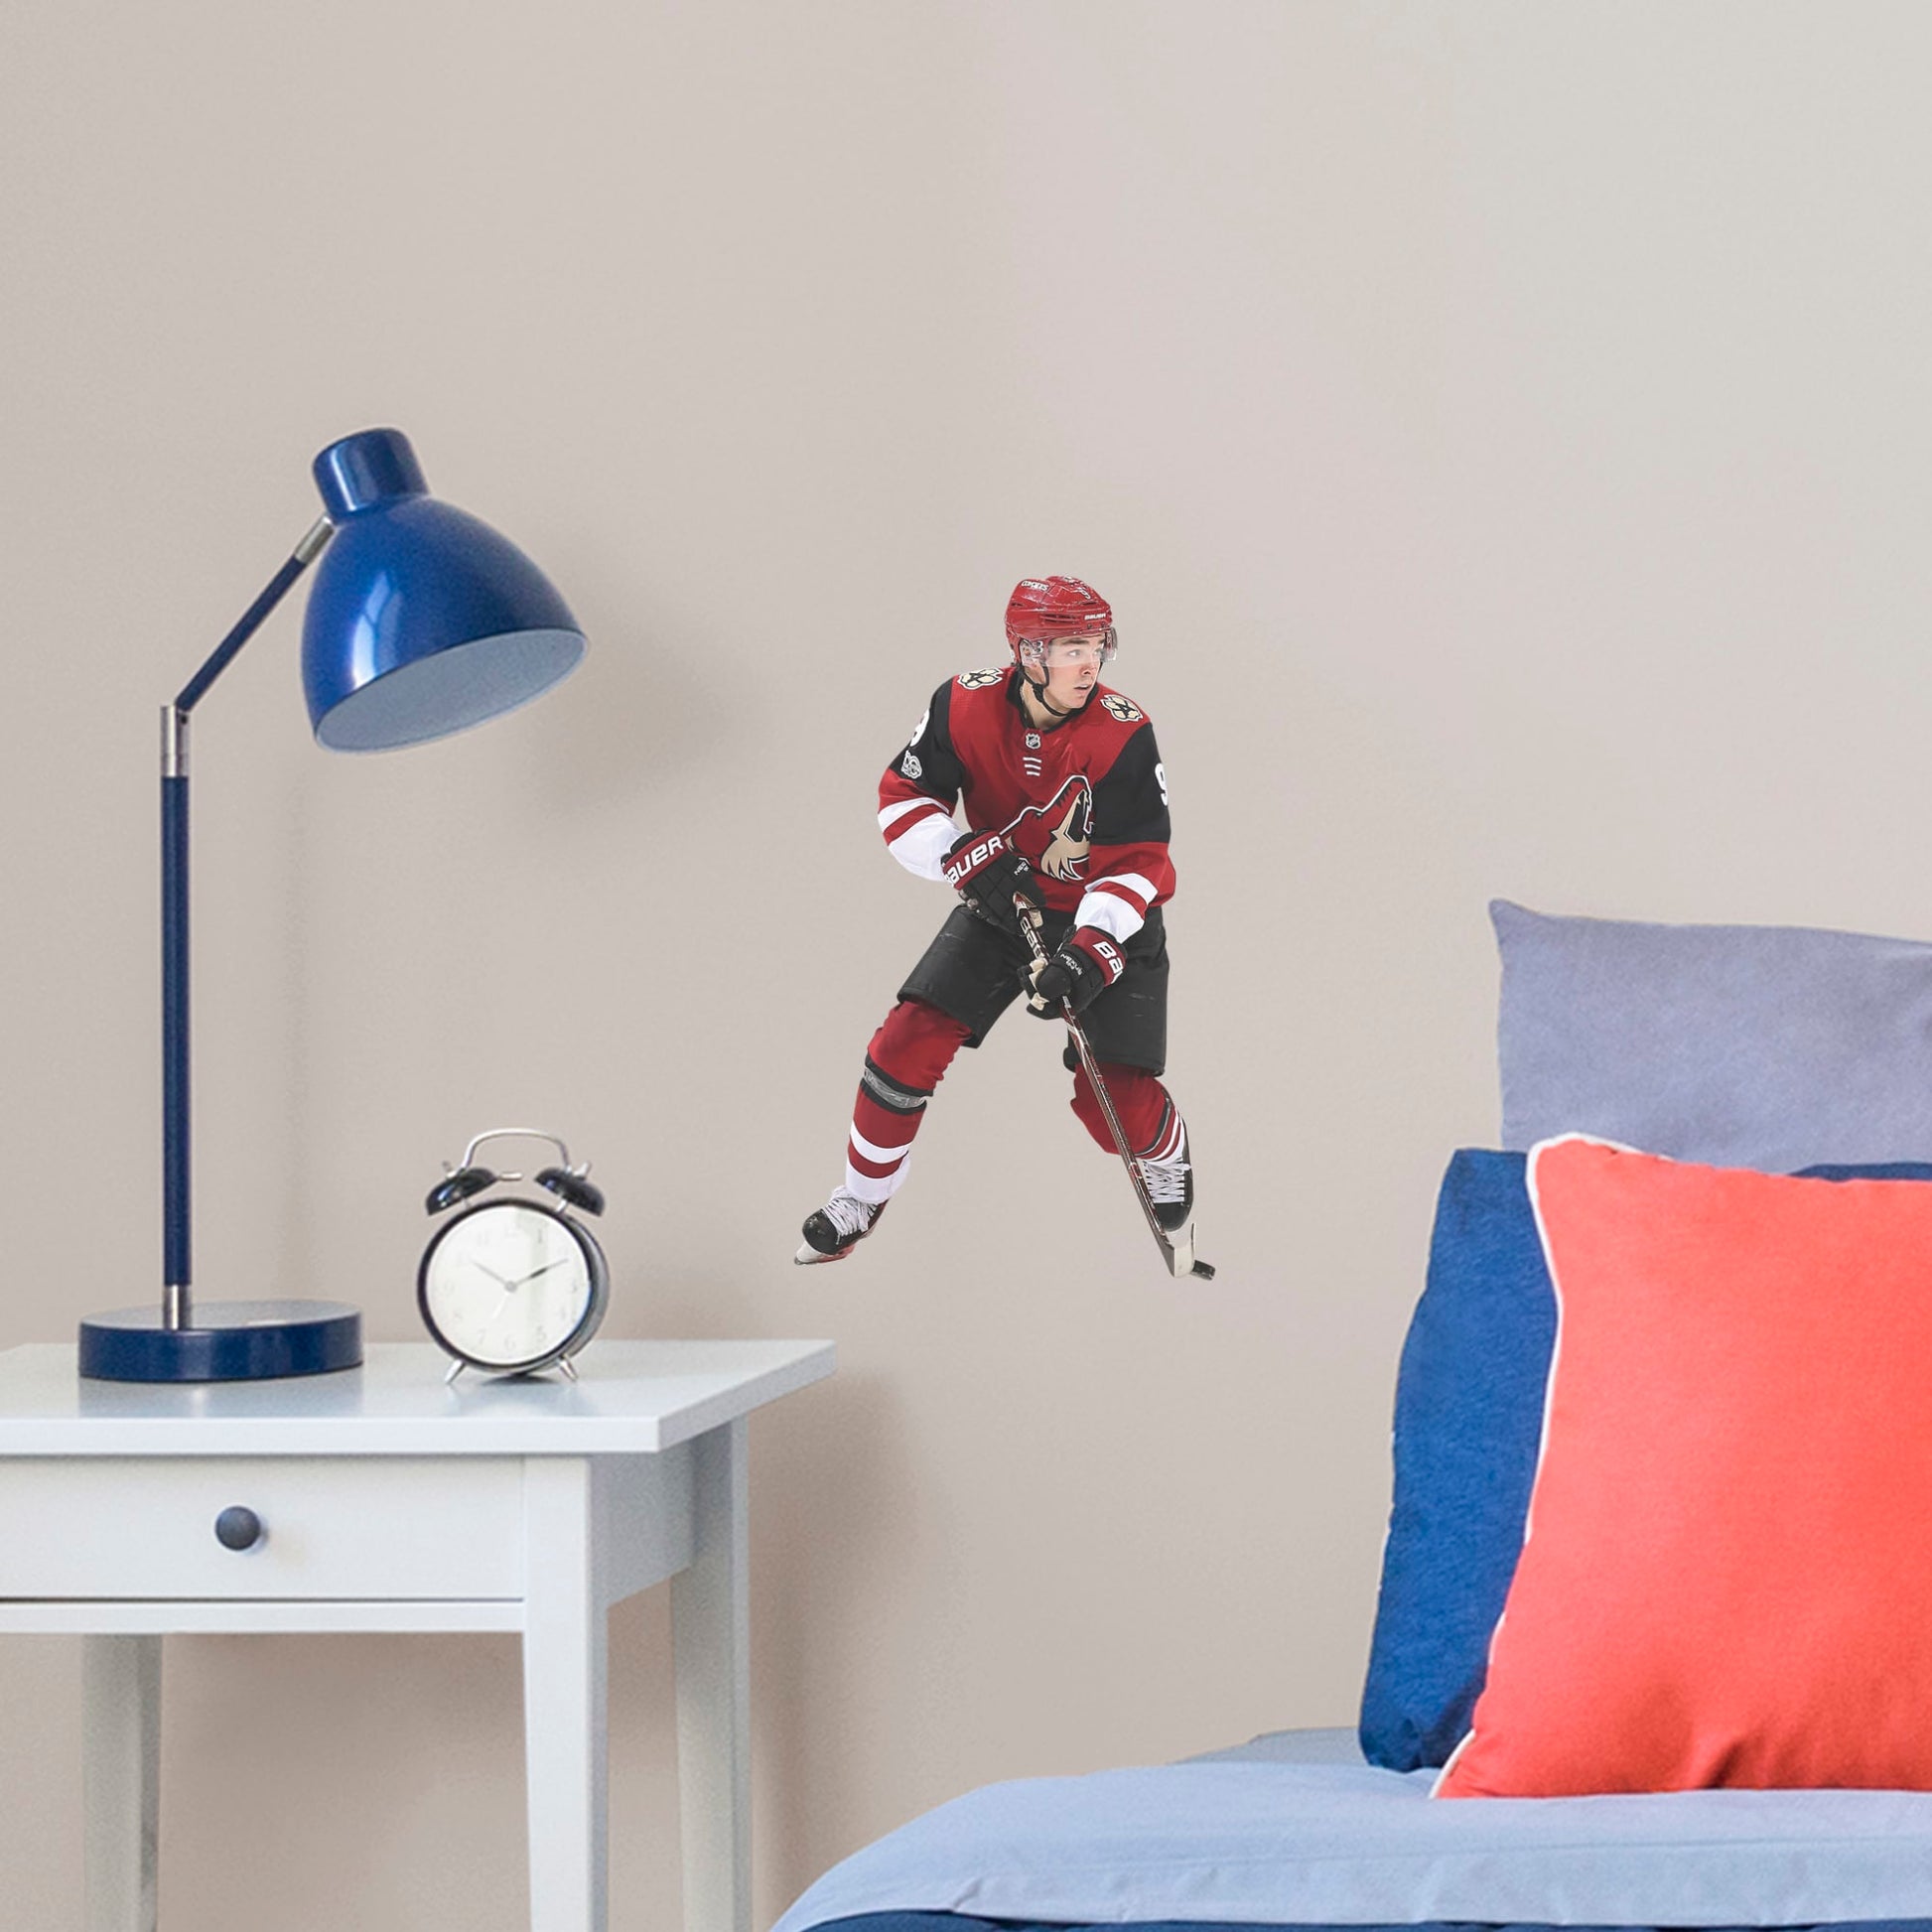 Large Athlete + 1 Decal (10"W x 17"H) Drafted seventh overall in the 2016, left wing player Clayton Keller is melting ice at Gila River Arena in Glendale. Cheer on Kellsy as he leads the Coyotes on to another championship with this distinctive colorful officially licensed NHL wall decal. Make a slap shot on a wall in your home, office, or coyote fan-den with this giftable reusable NHL decal. Perfect gift idea for a fan!